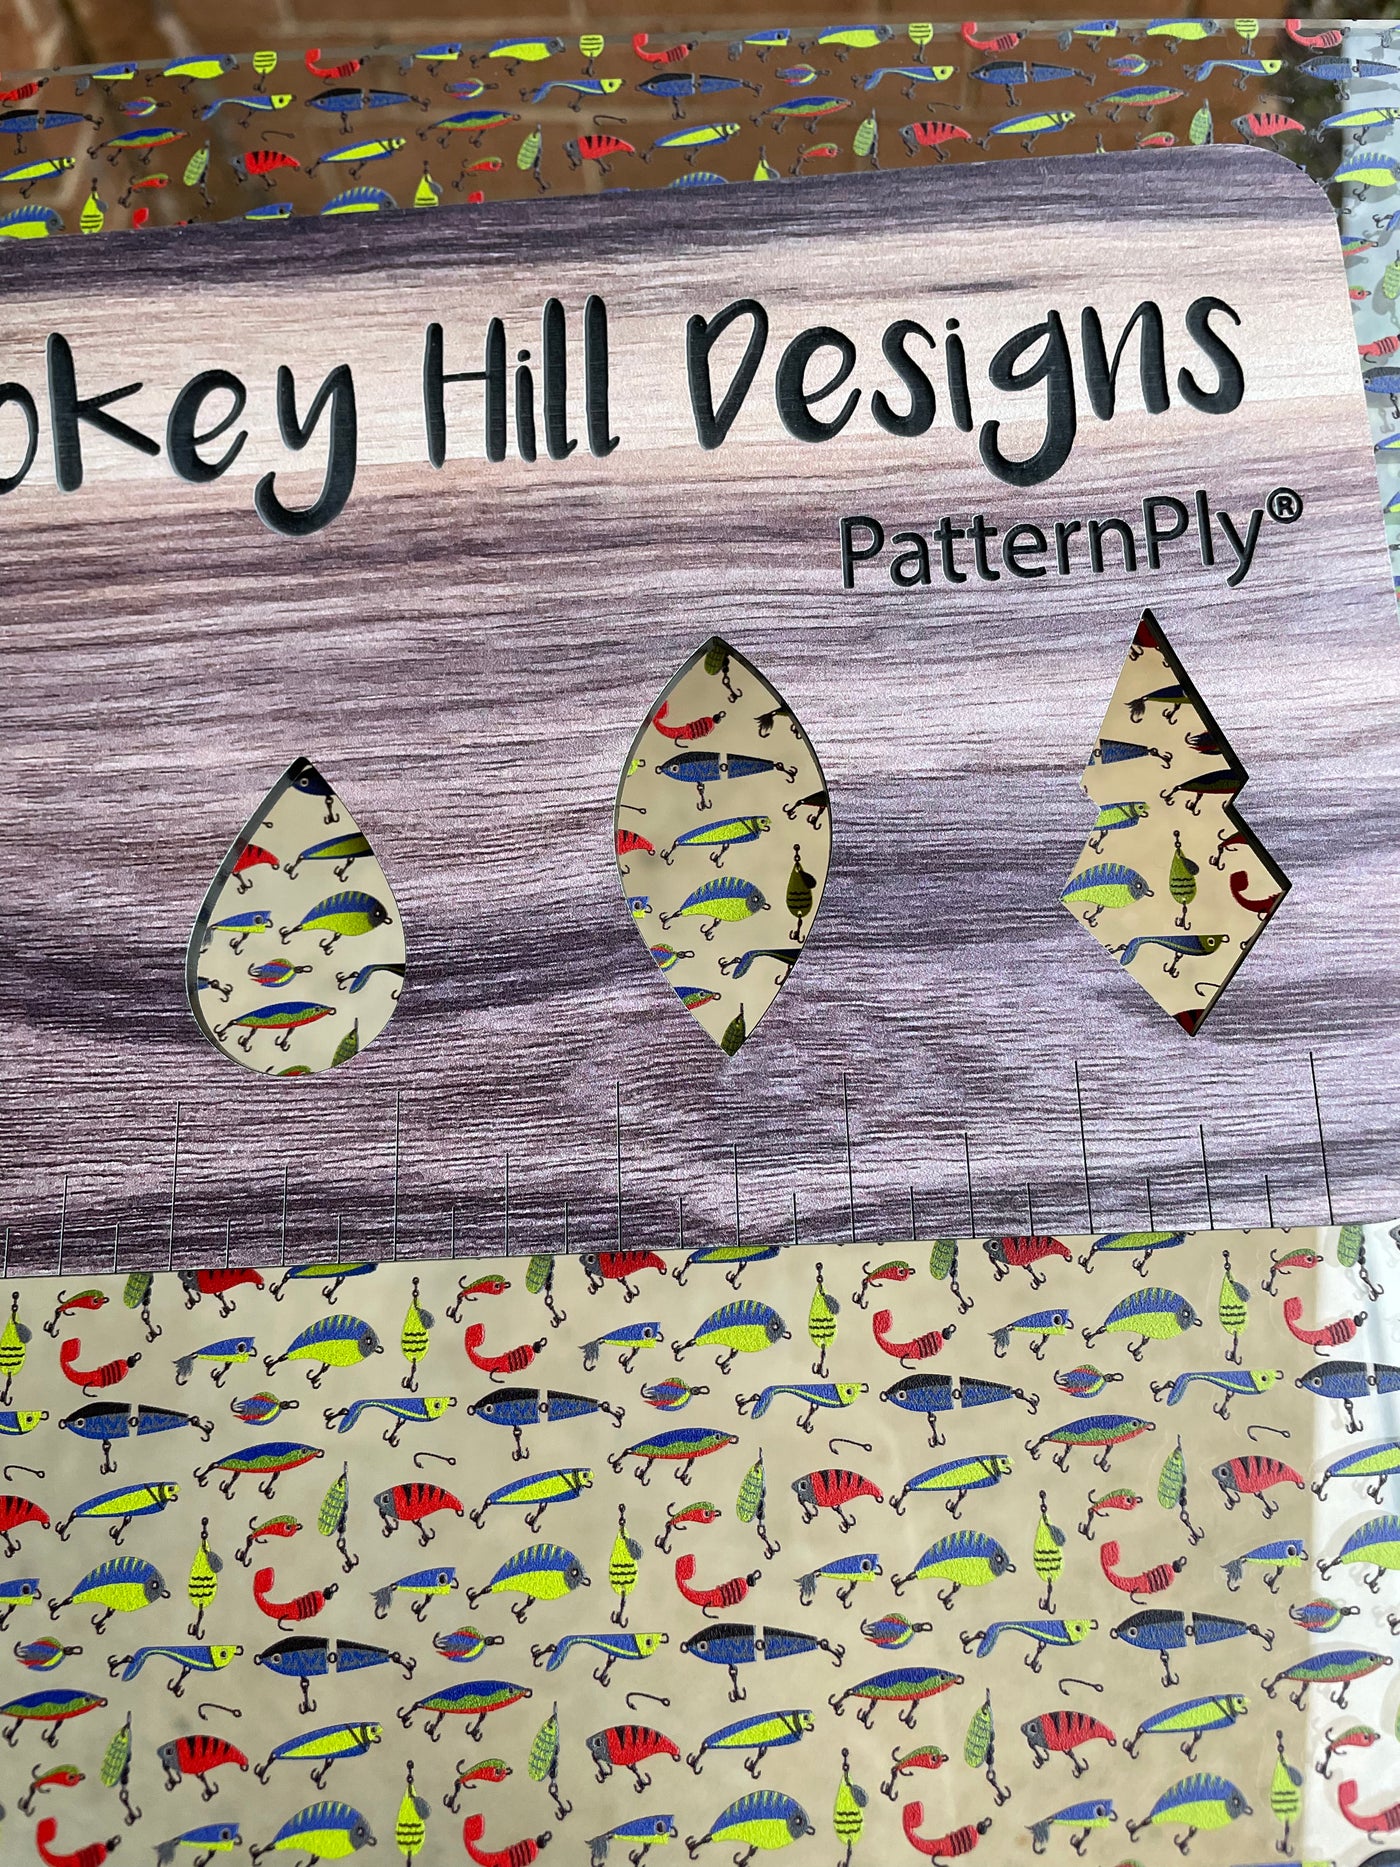 PatternPly® Scattered Fishing Lures